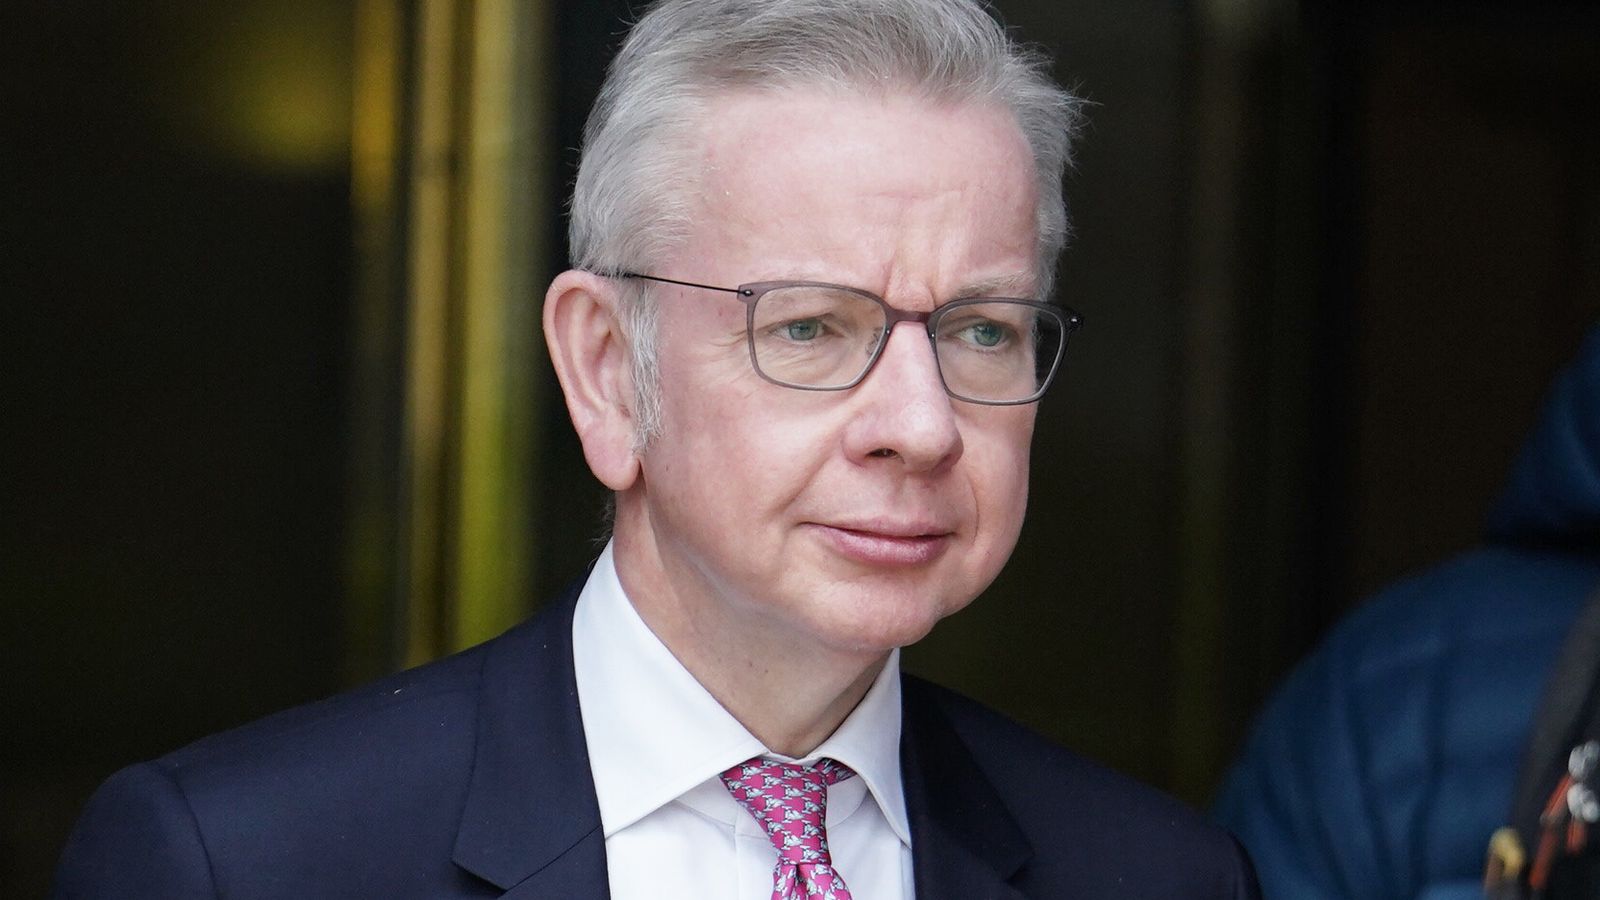 Housing Secretary Michael Gove and former business secretary Andrea Leadsom will not stand at general election